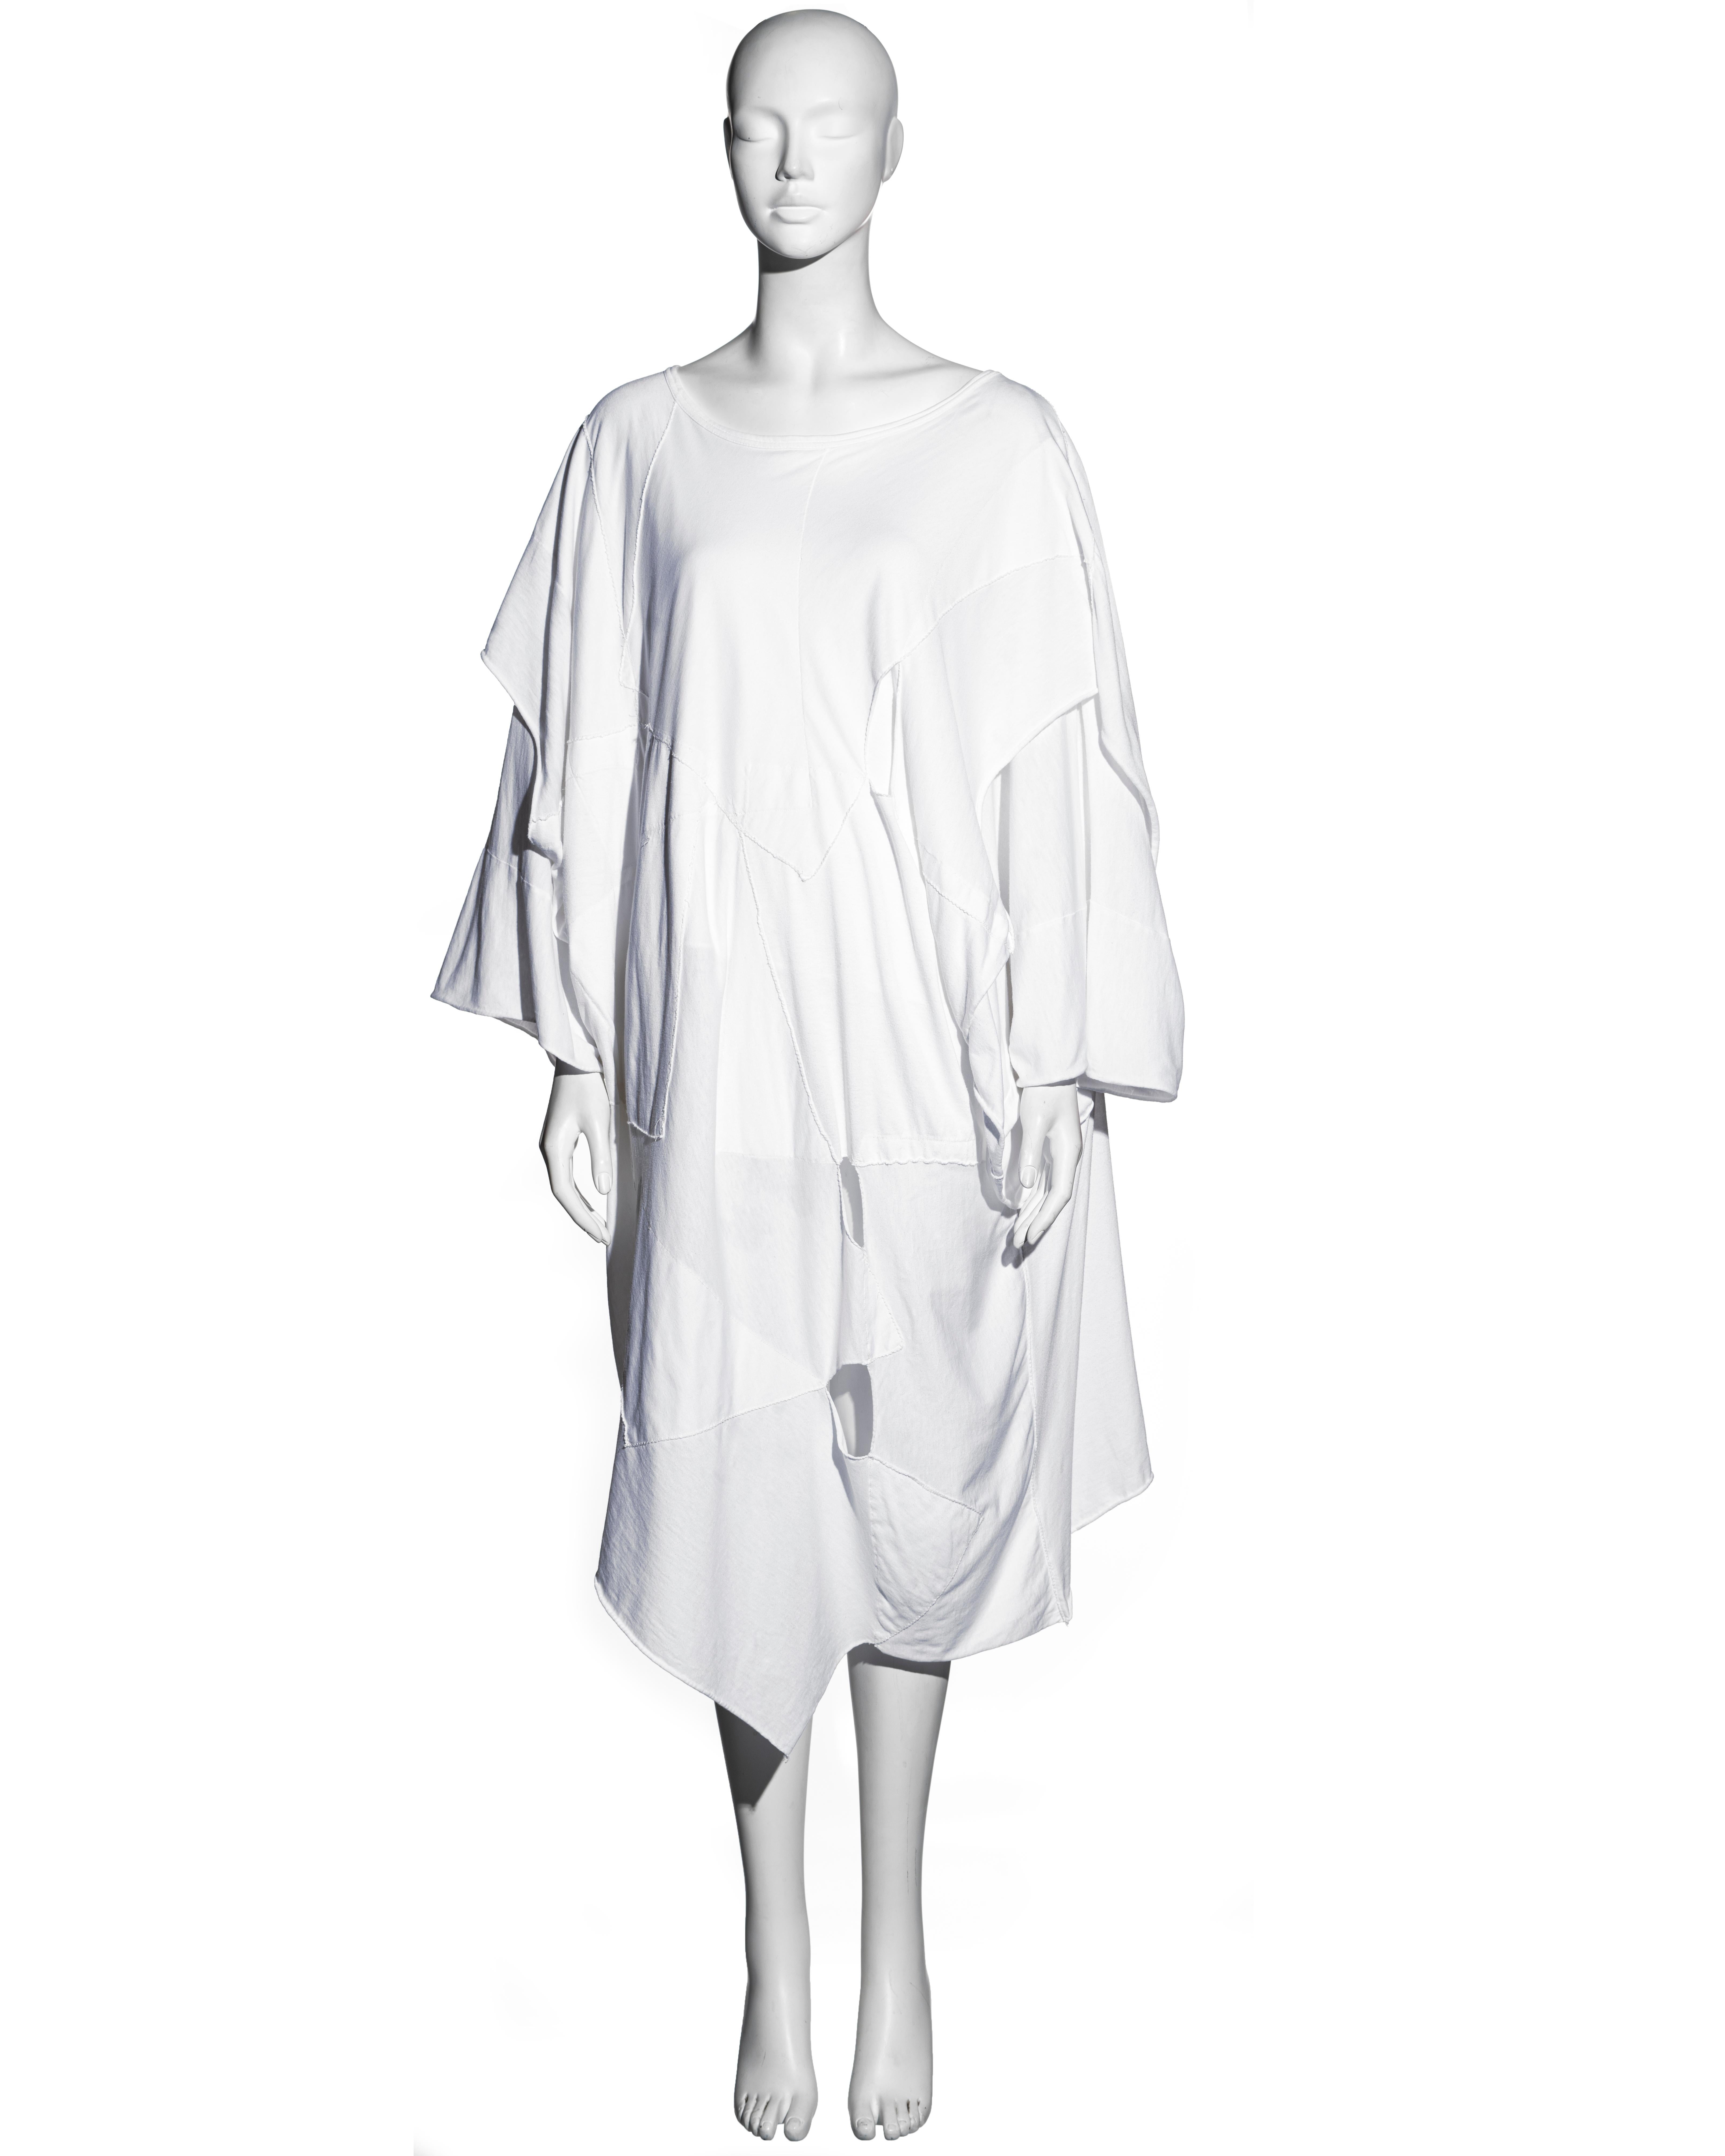 ▪ Comme des Garcons white oversized patchwork t-shirt dress
▪ 100% cotton
▪ Double layered 
▪ Scoop neck 
▪ Wide-cut 
▪ Irregular seams and slits throughout 
▪ One Size
▪ Spring-Summer 1983